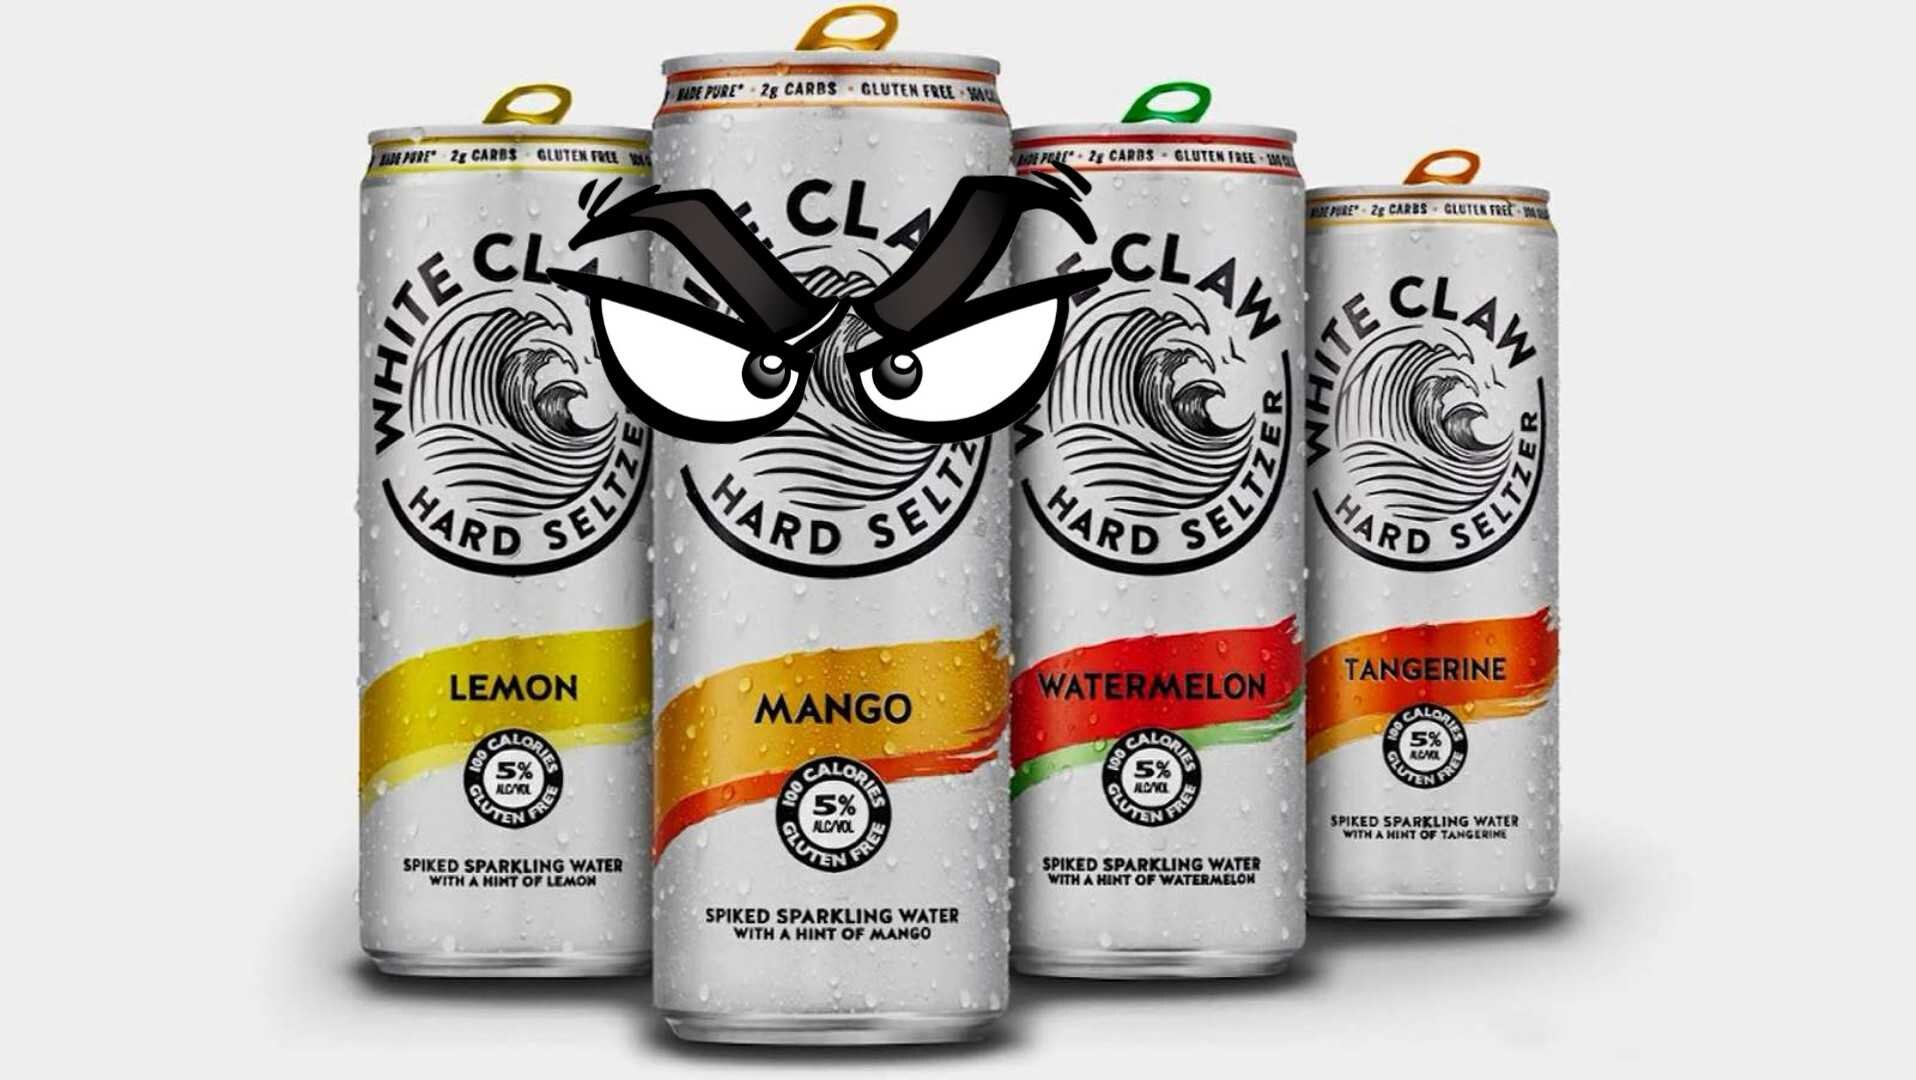 Can You Get Drunk Off White Claw Your Second White Claw Wants You To Know That You Literally Aren T Drunk Yet Calm Down The Eggplant